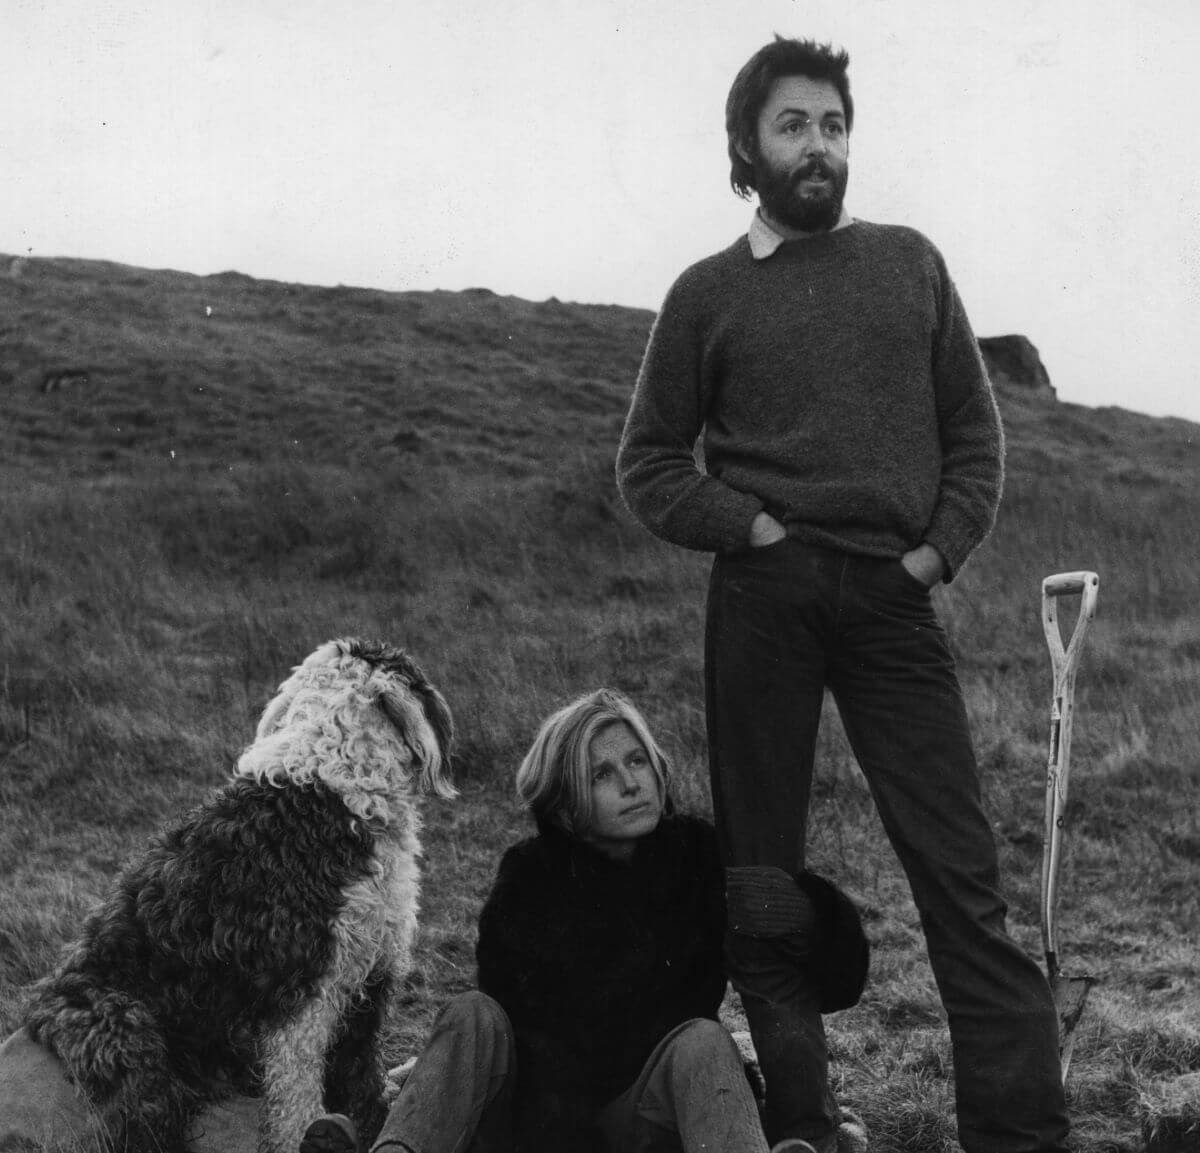 A black and whtie picture of Paul McCartney standing next to a shovel. Linda McCartney sits at his feet next to their dog.